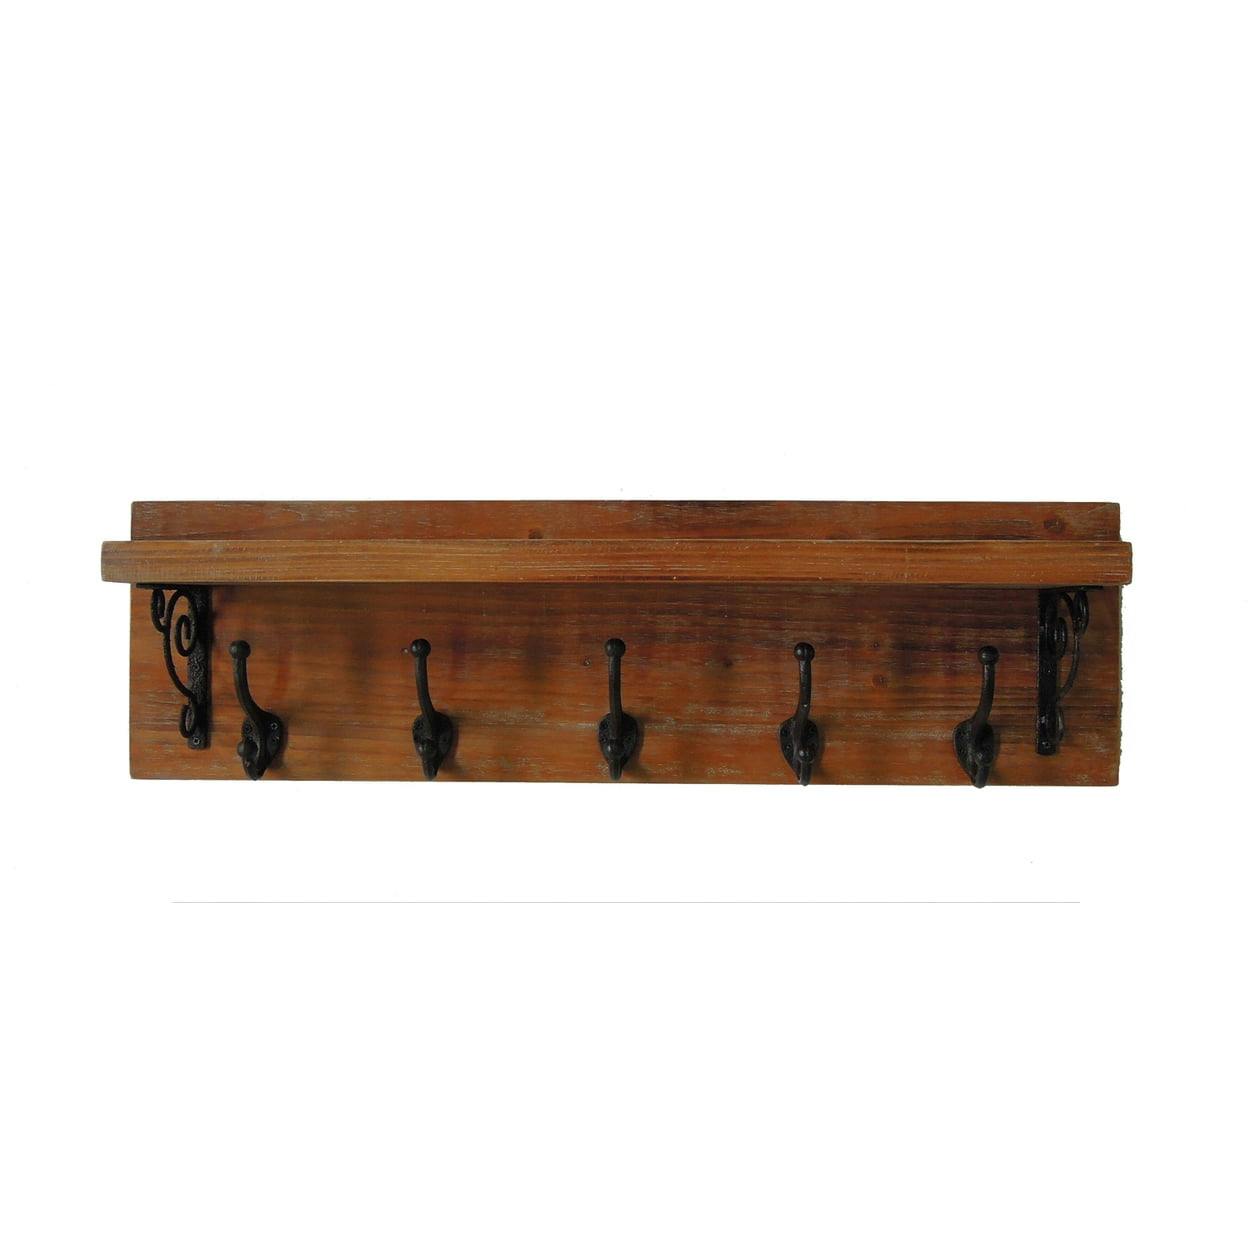 Victoria Natural Wood Wall Shelf with Metal Hooks - 42"